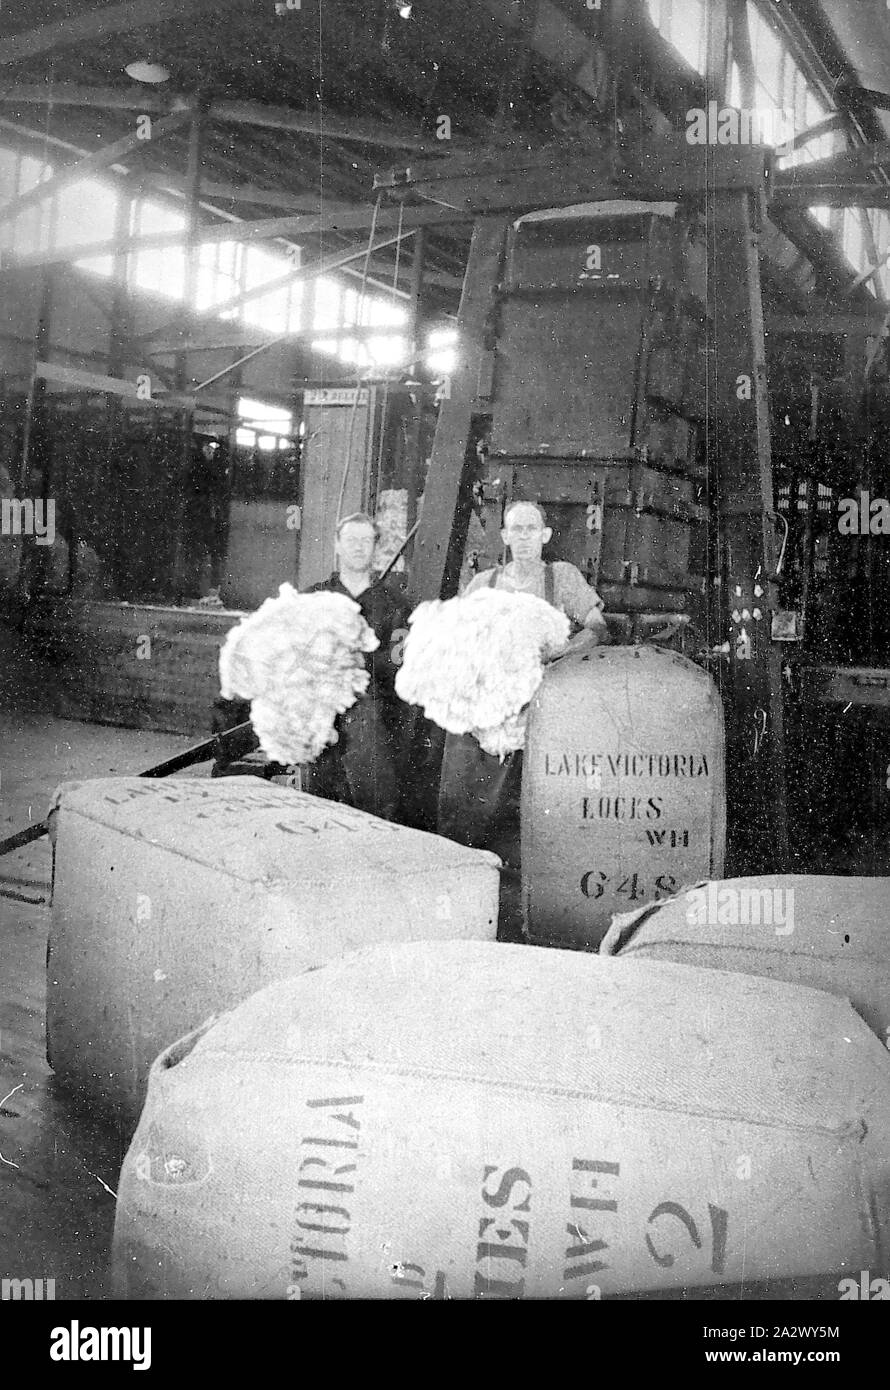 Negative - Lake Victoria, New South Wales, circa 1930, Inside the wool shed on 'Lake Victoria' station. Two men stand holding fleeces Stock Photo